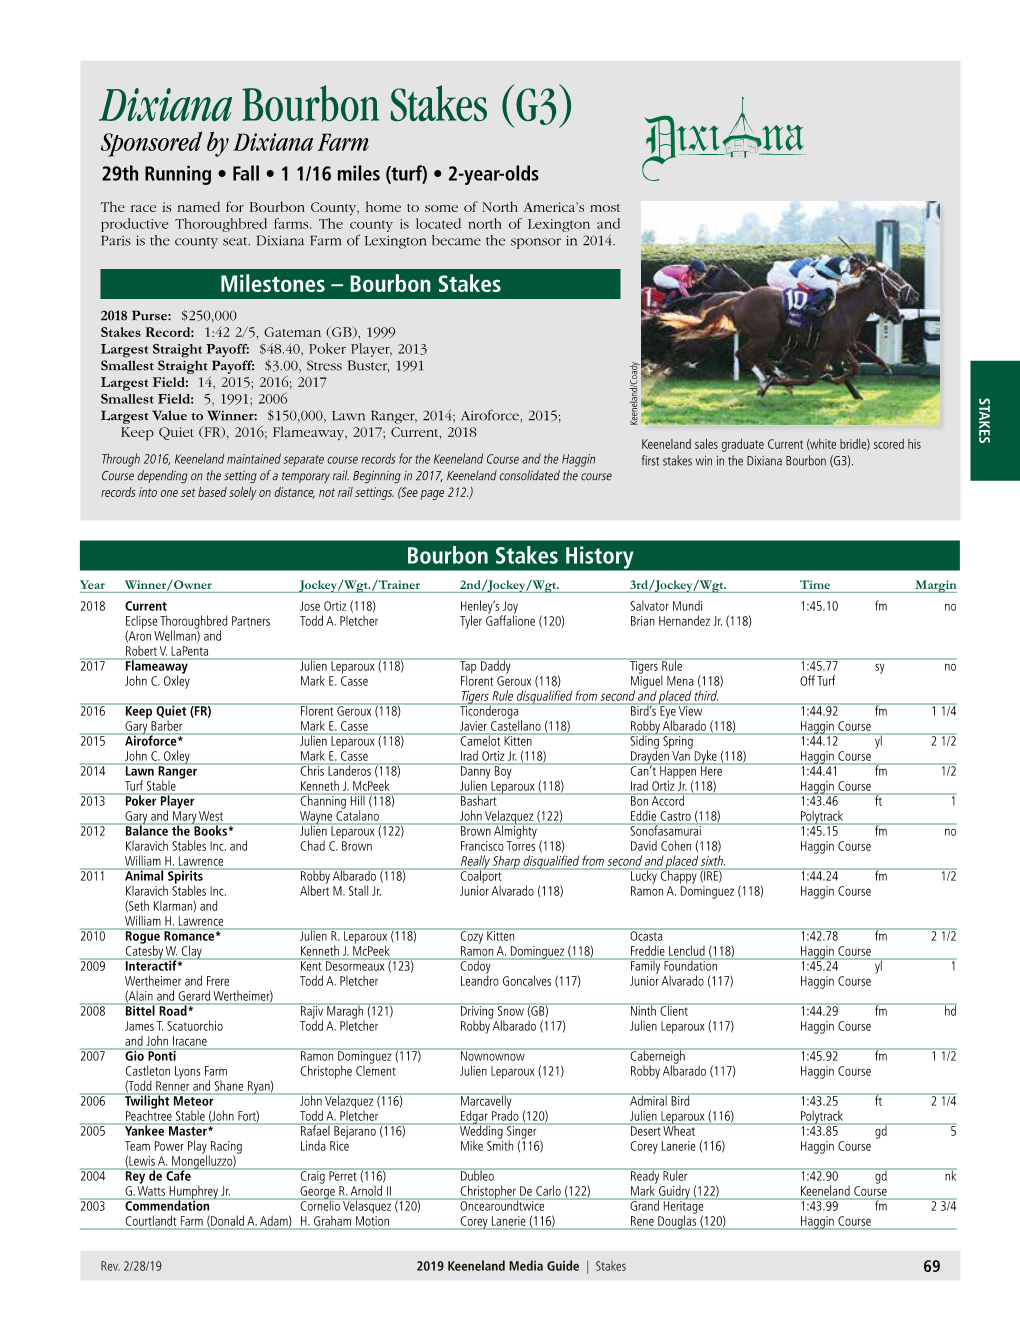 Dixiana Bourbon Stakes (G3) Sponsored by Dixiana Farm 29Th Running • Fall • 1 1/16 Miles (Turf) • 2-Year-Olds